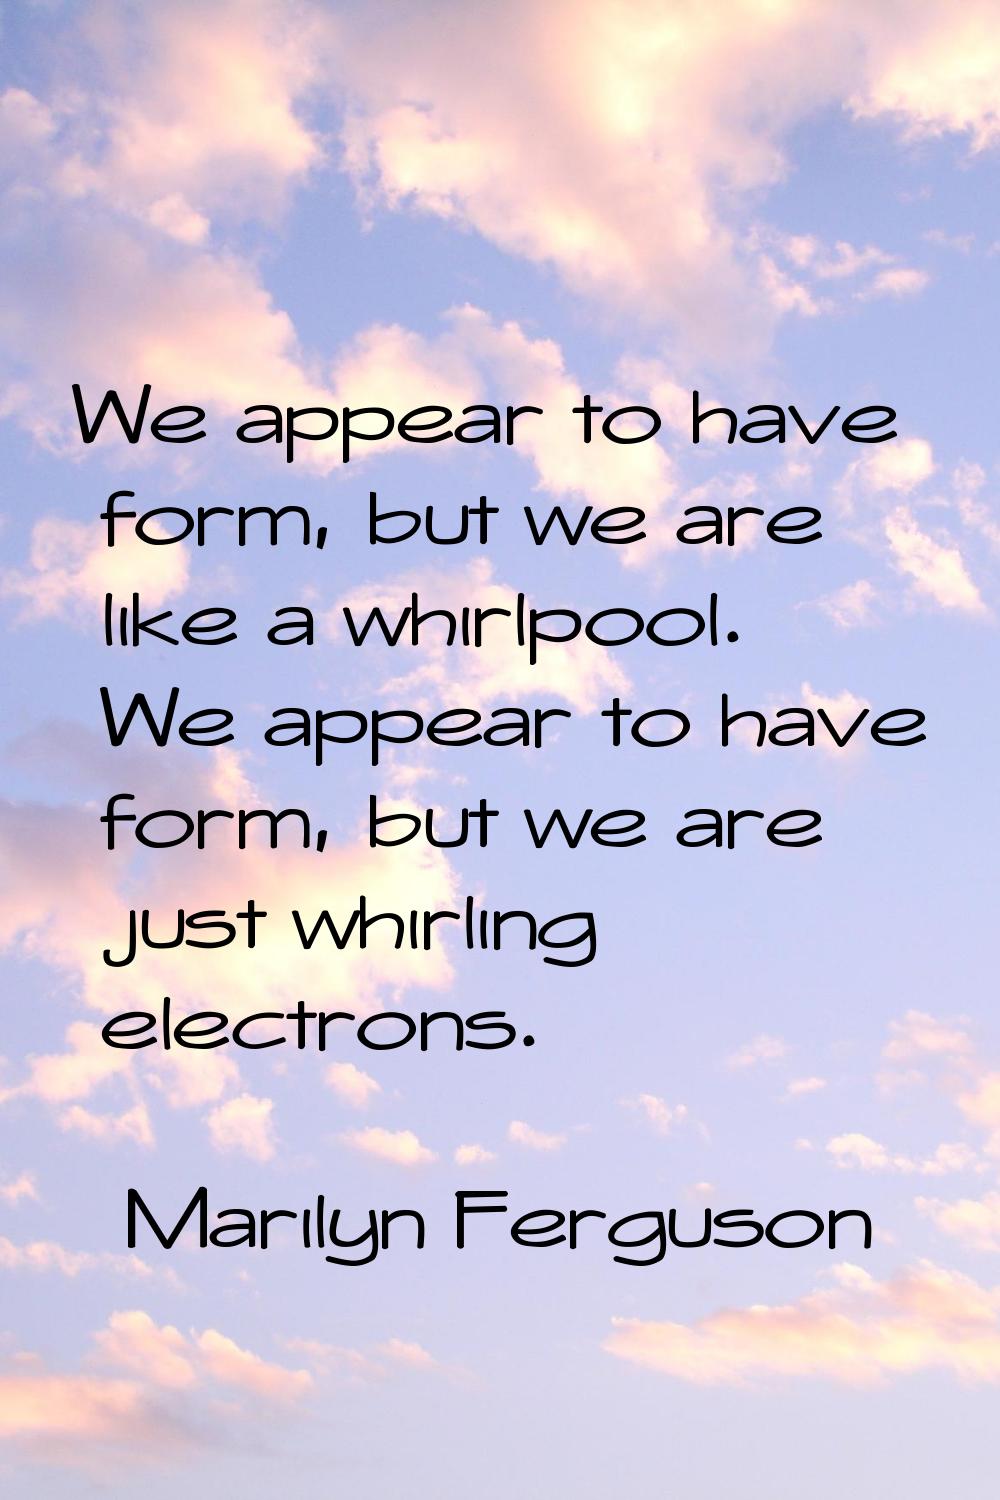 We appear to have form, but we are like a whirlpool. We appear to have form, but we are just whirli